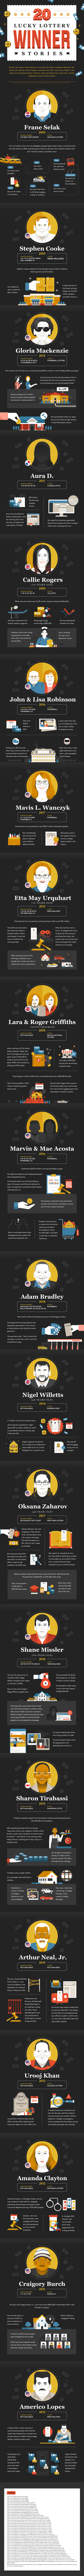 INFOGRAPHIC: 20 LUCKY LOTTERY WINNER STORIES